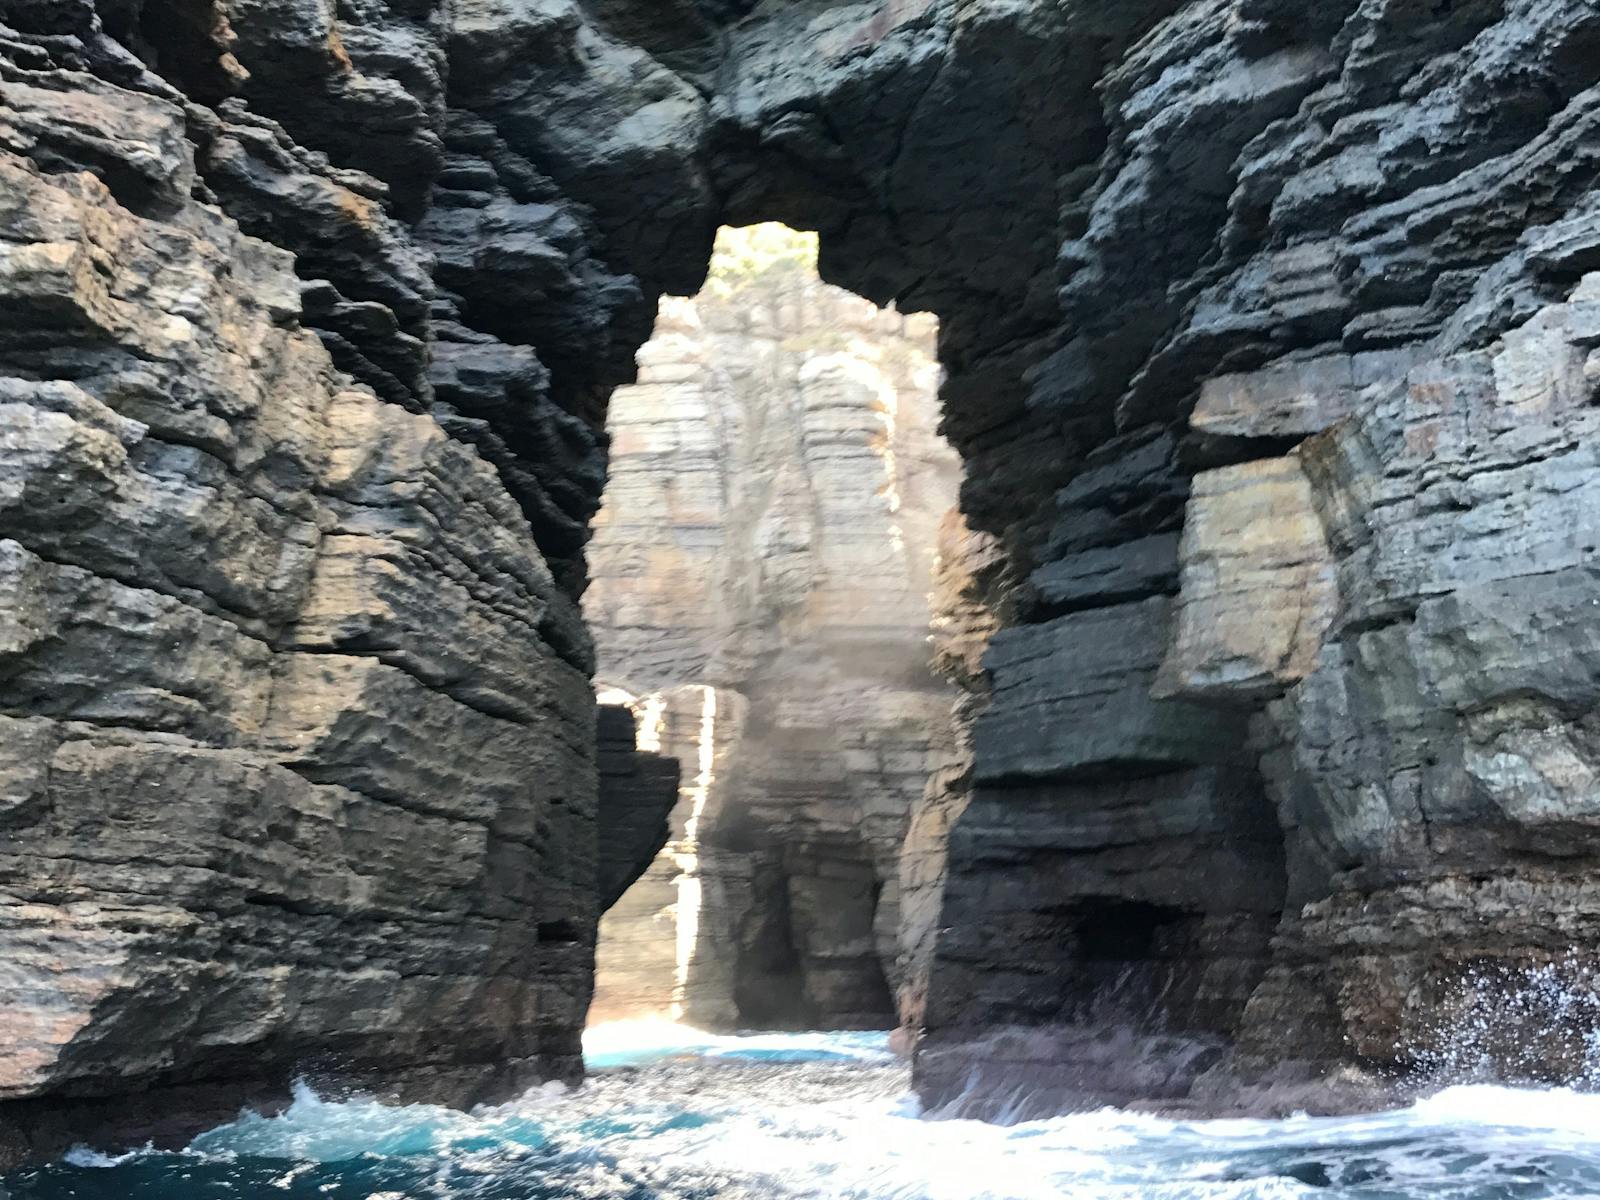 Sea caves of Jervis Bay